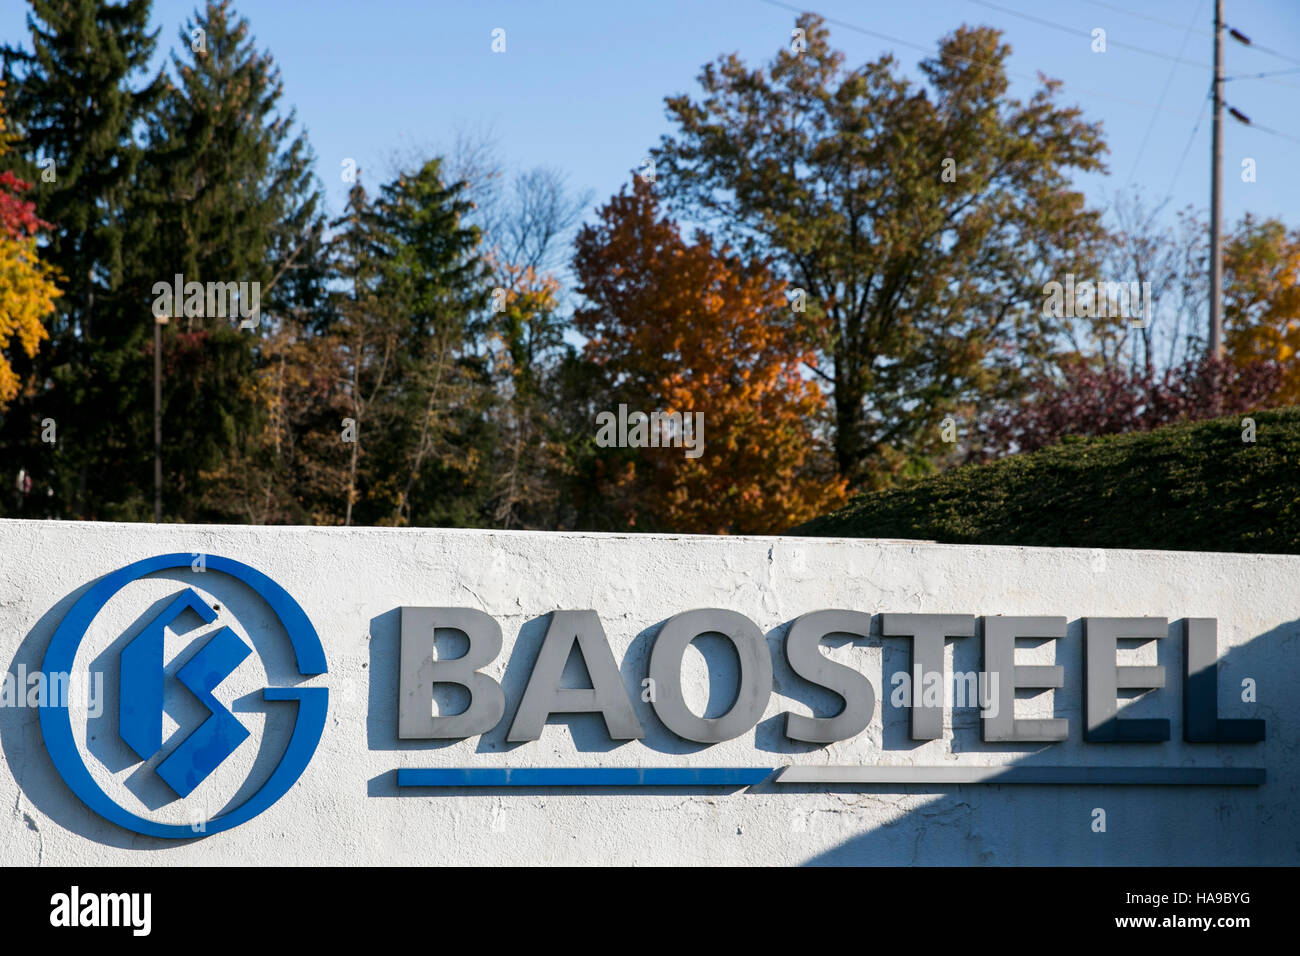 A logo sign outside of a facility occupied by the Baosteel Group in Montvale, New Jersey on November 5, 2016. Stock Photo